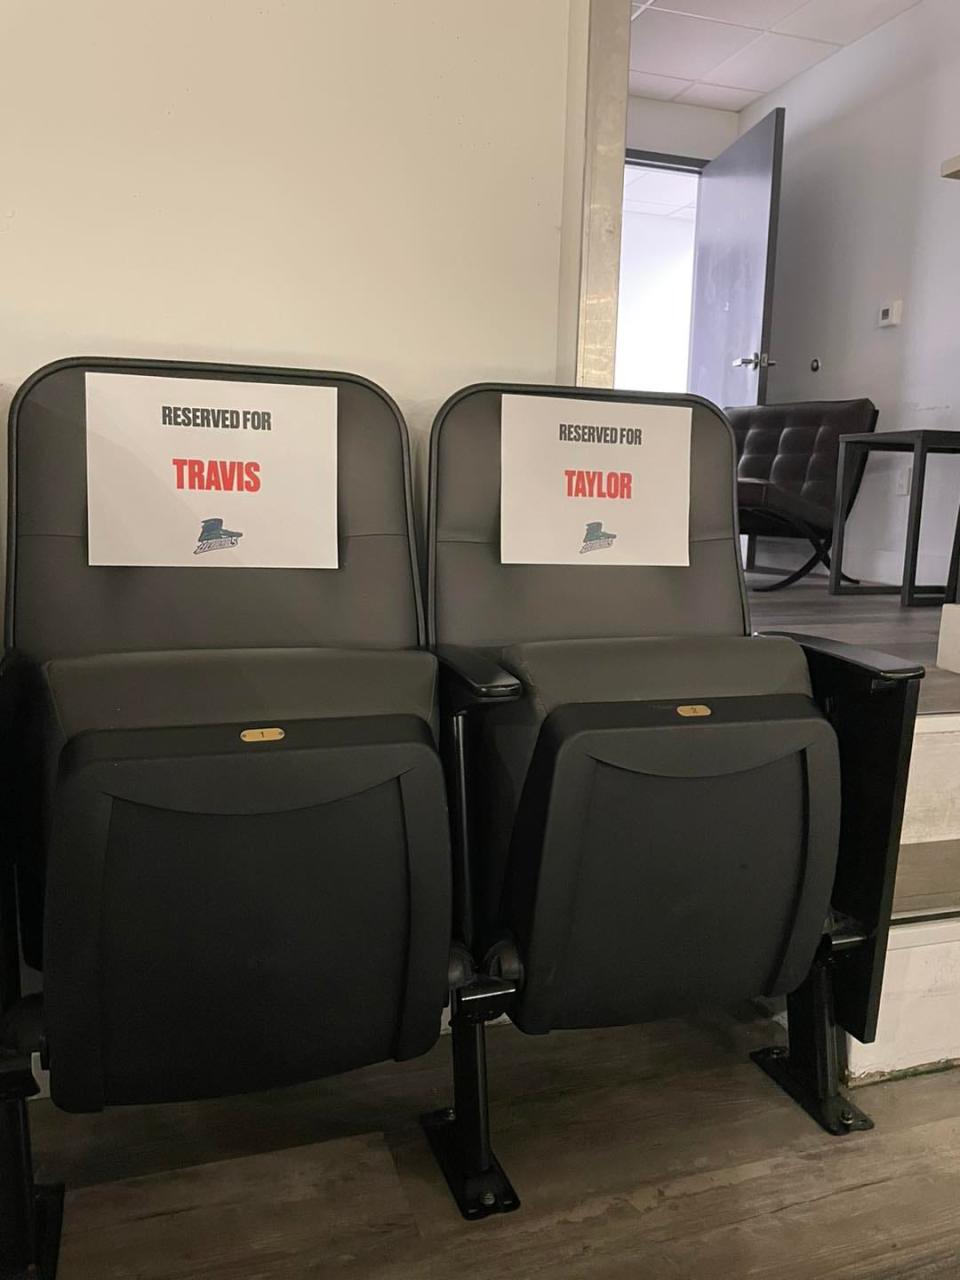 The Florida Everblades minor league hockey team has reserved two seats in a suite at Hertz Arena for the team's home opener on Oct. 28. One is for NFL star Travis Kelce and one is for ultra-popular signer Taylor Swift.